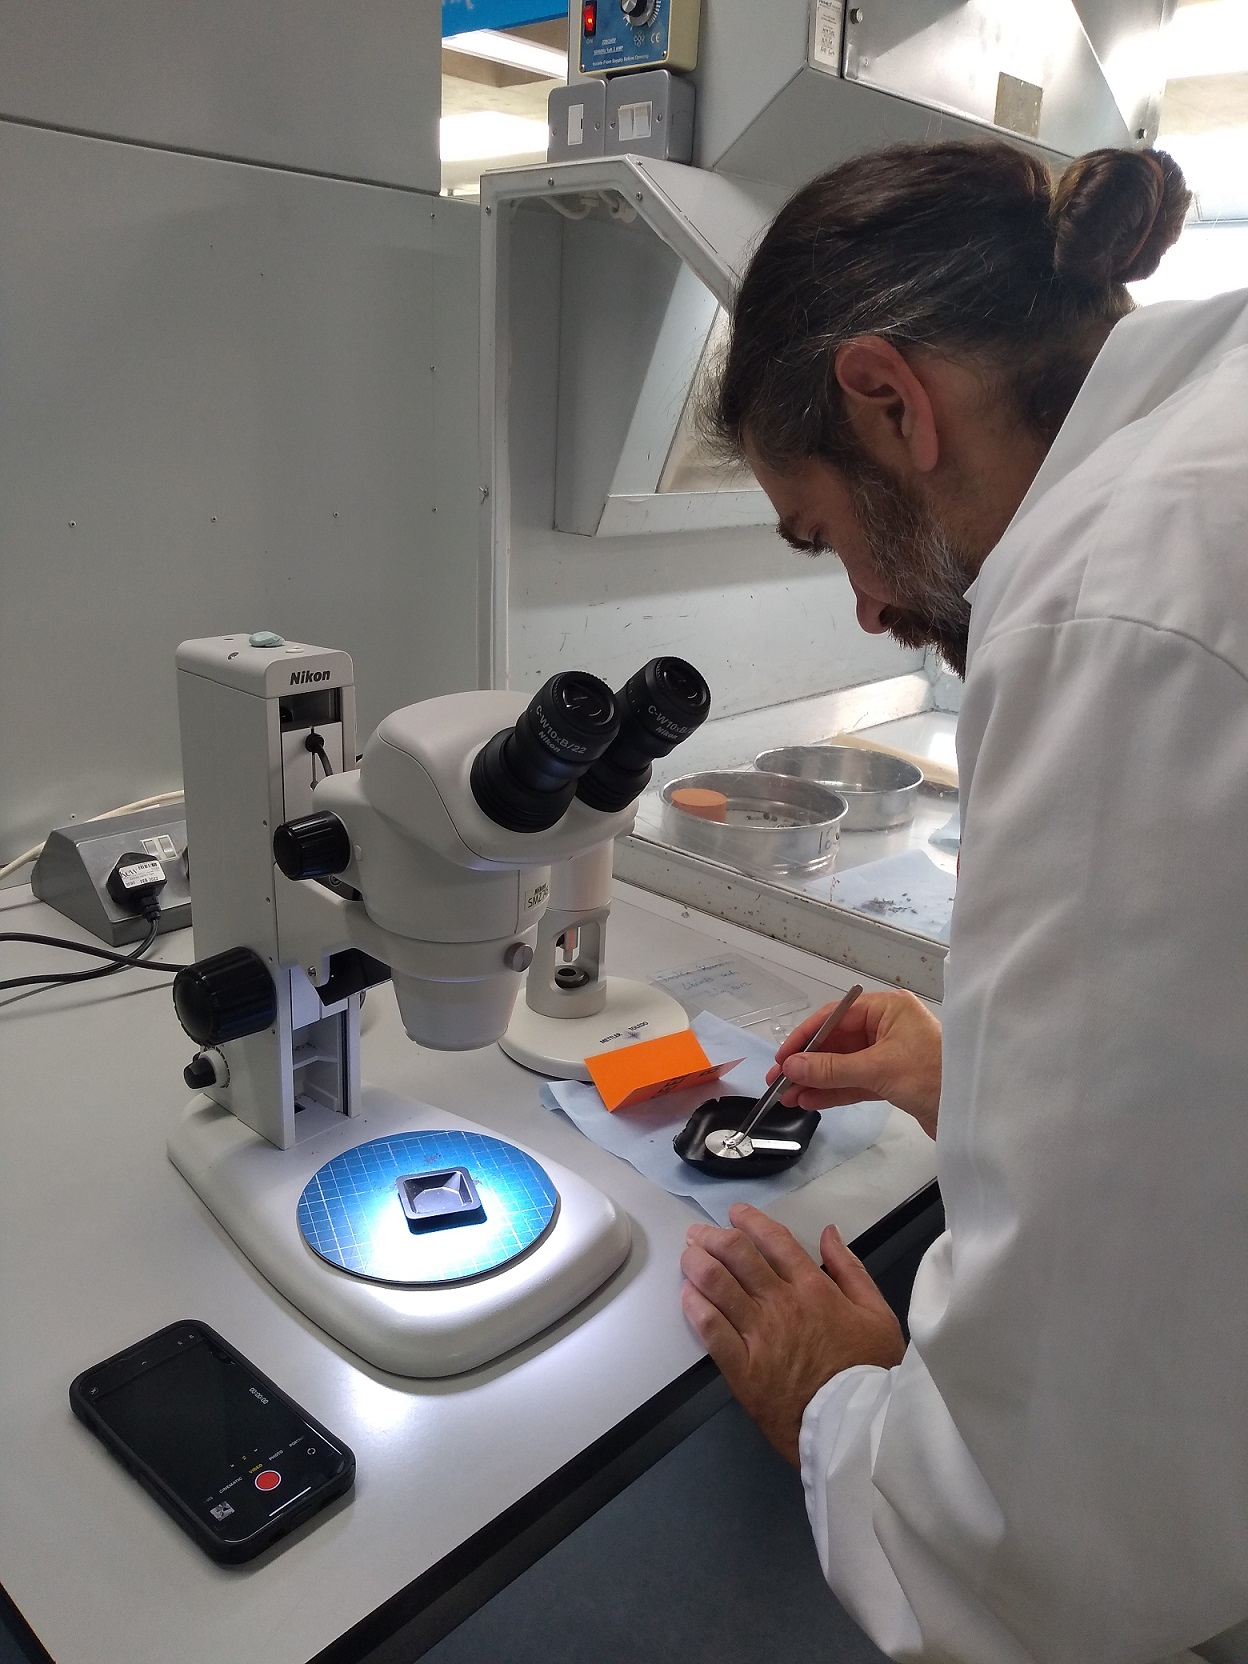 Dustin wearing a white lab coat, bent over a small black tray of seeds holding tweezers. Next to him on the bench is a microscope with a small black tray on ready for the next sample